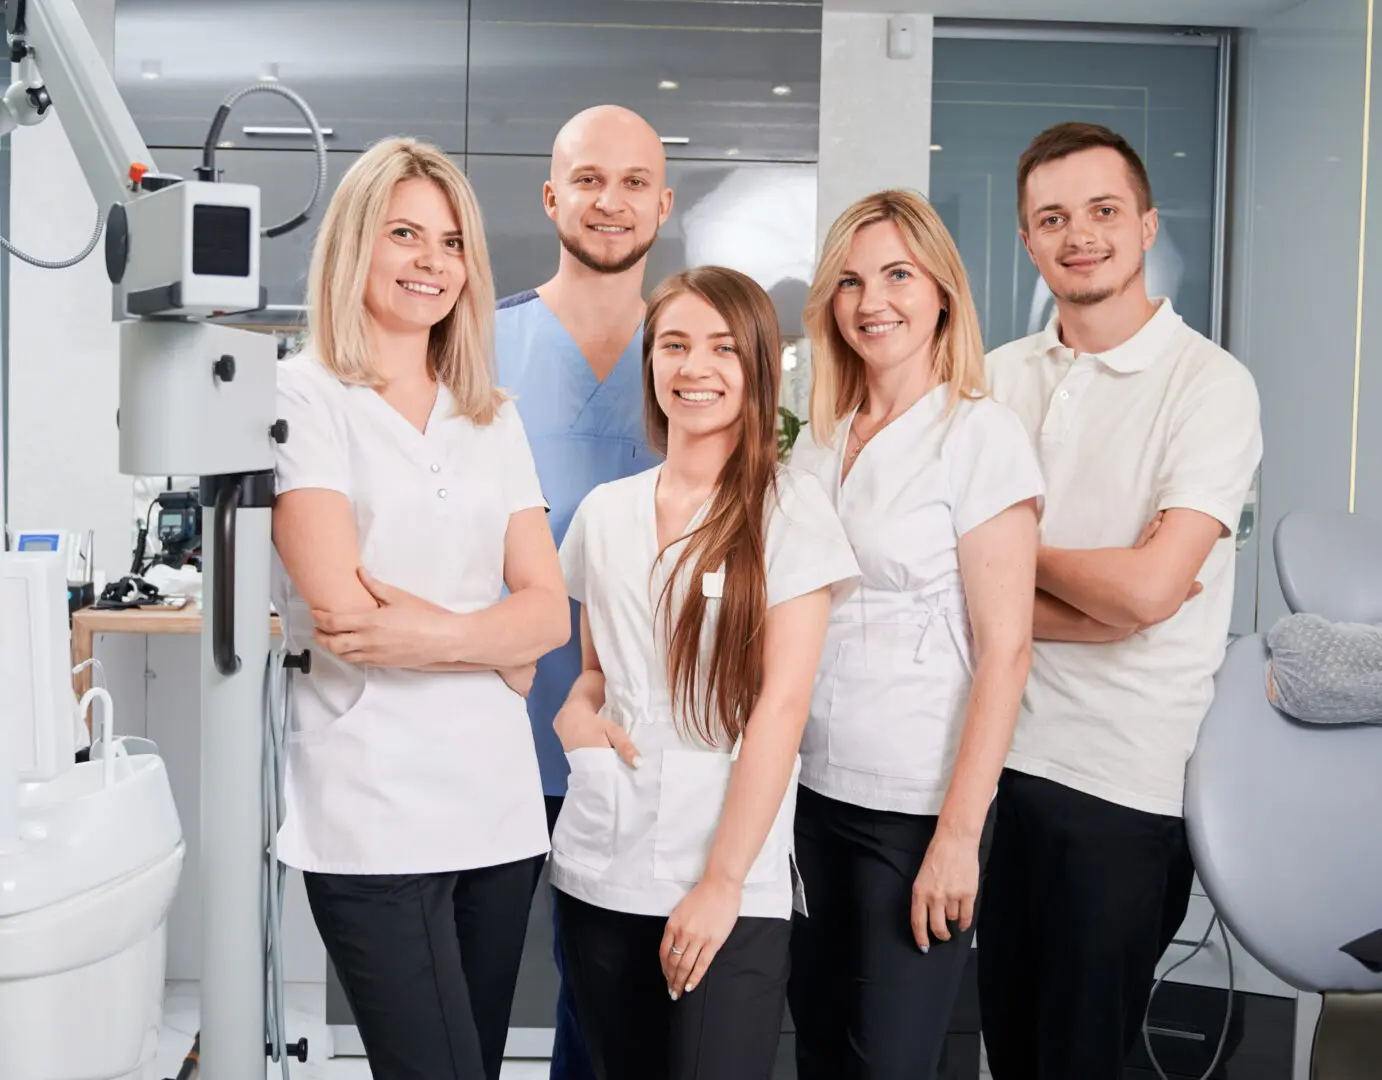 A group of people standing in front of an eye exam room.